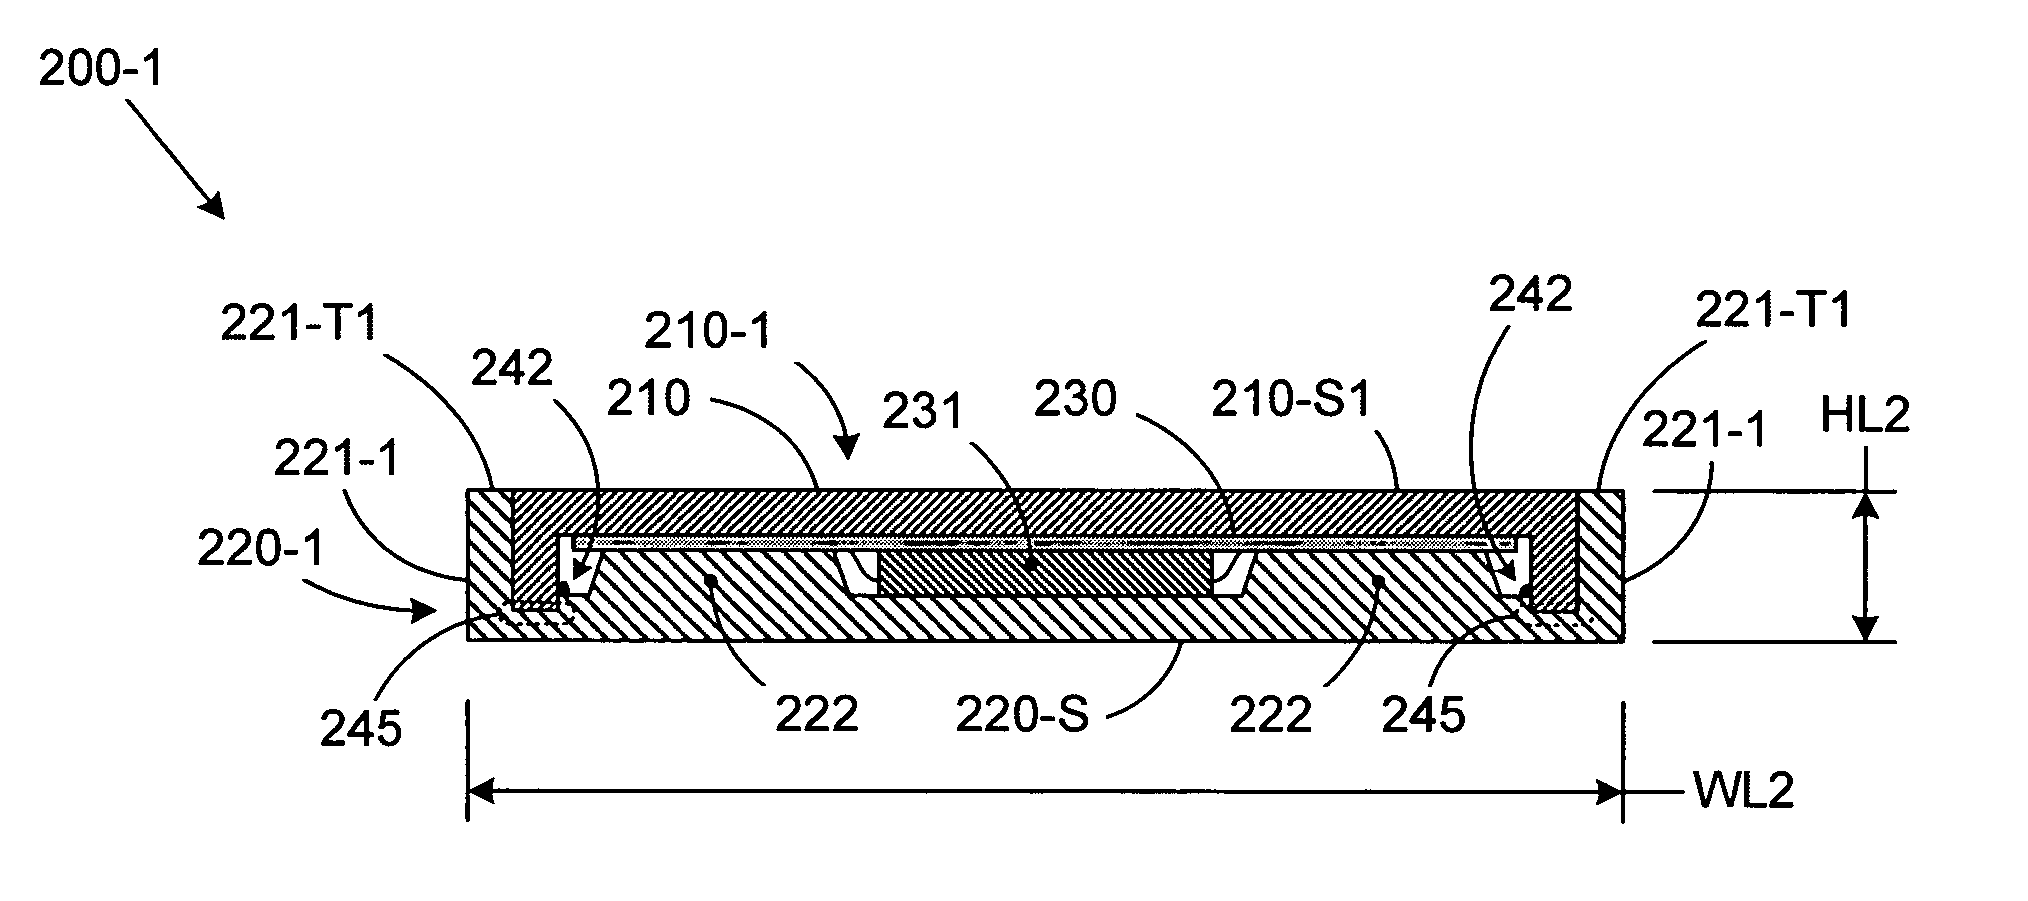 Card-type electronic apparatus assembly using ultrasonic joining